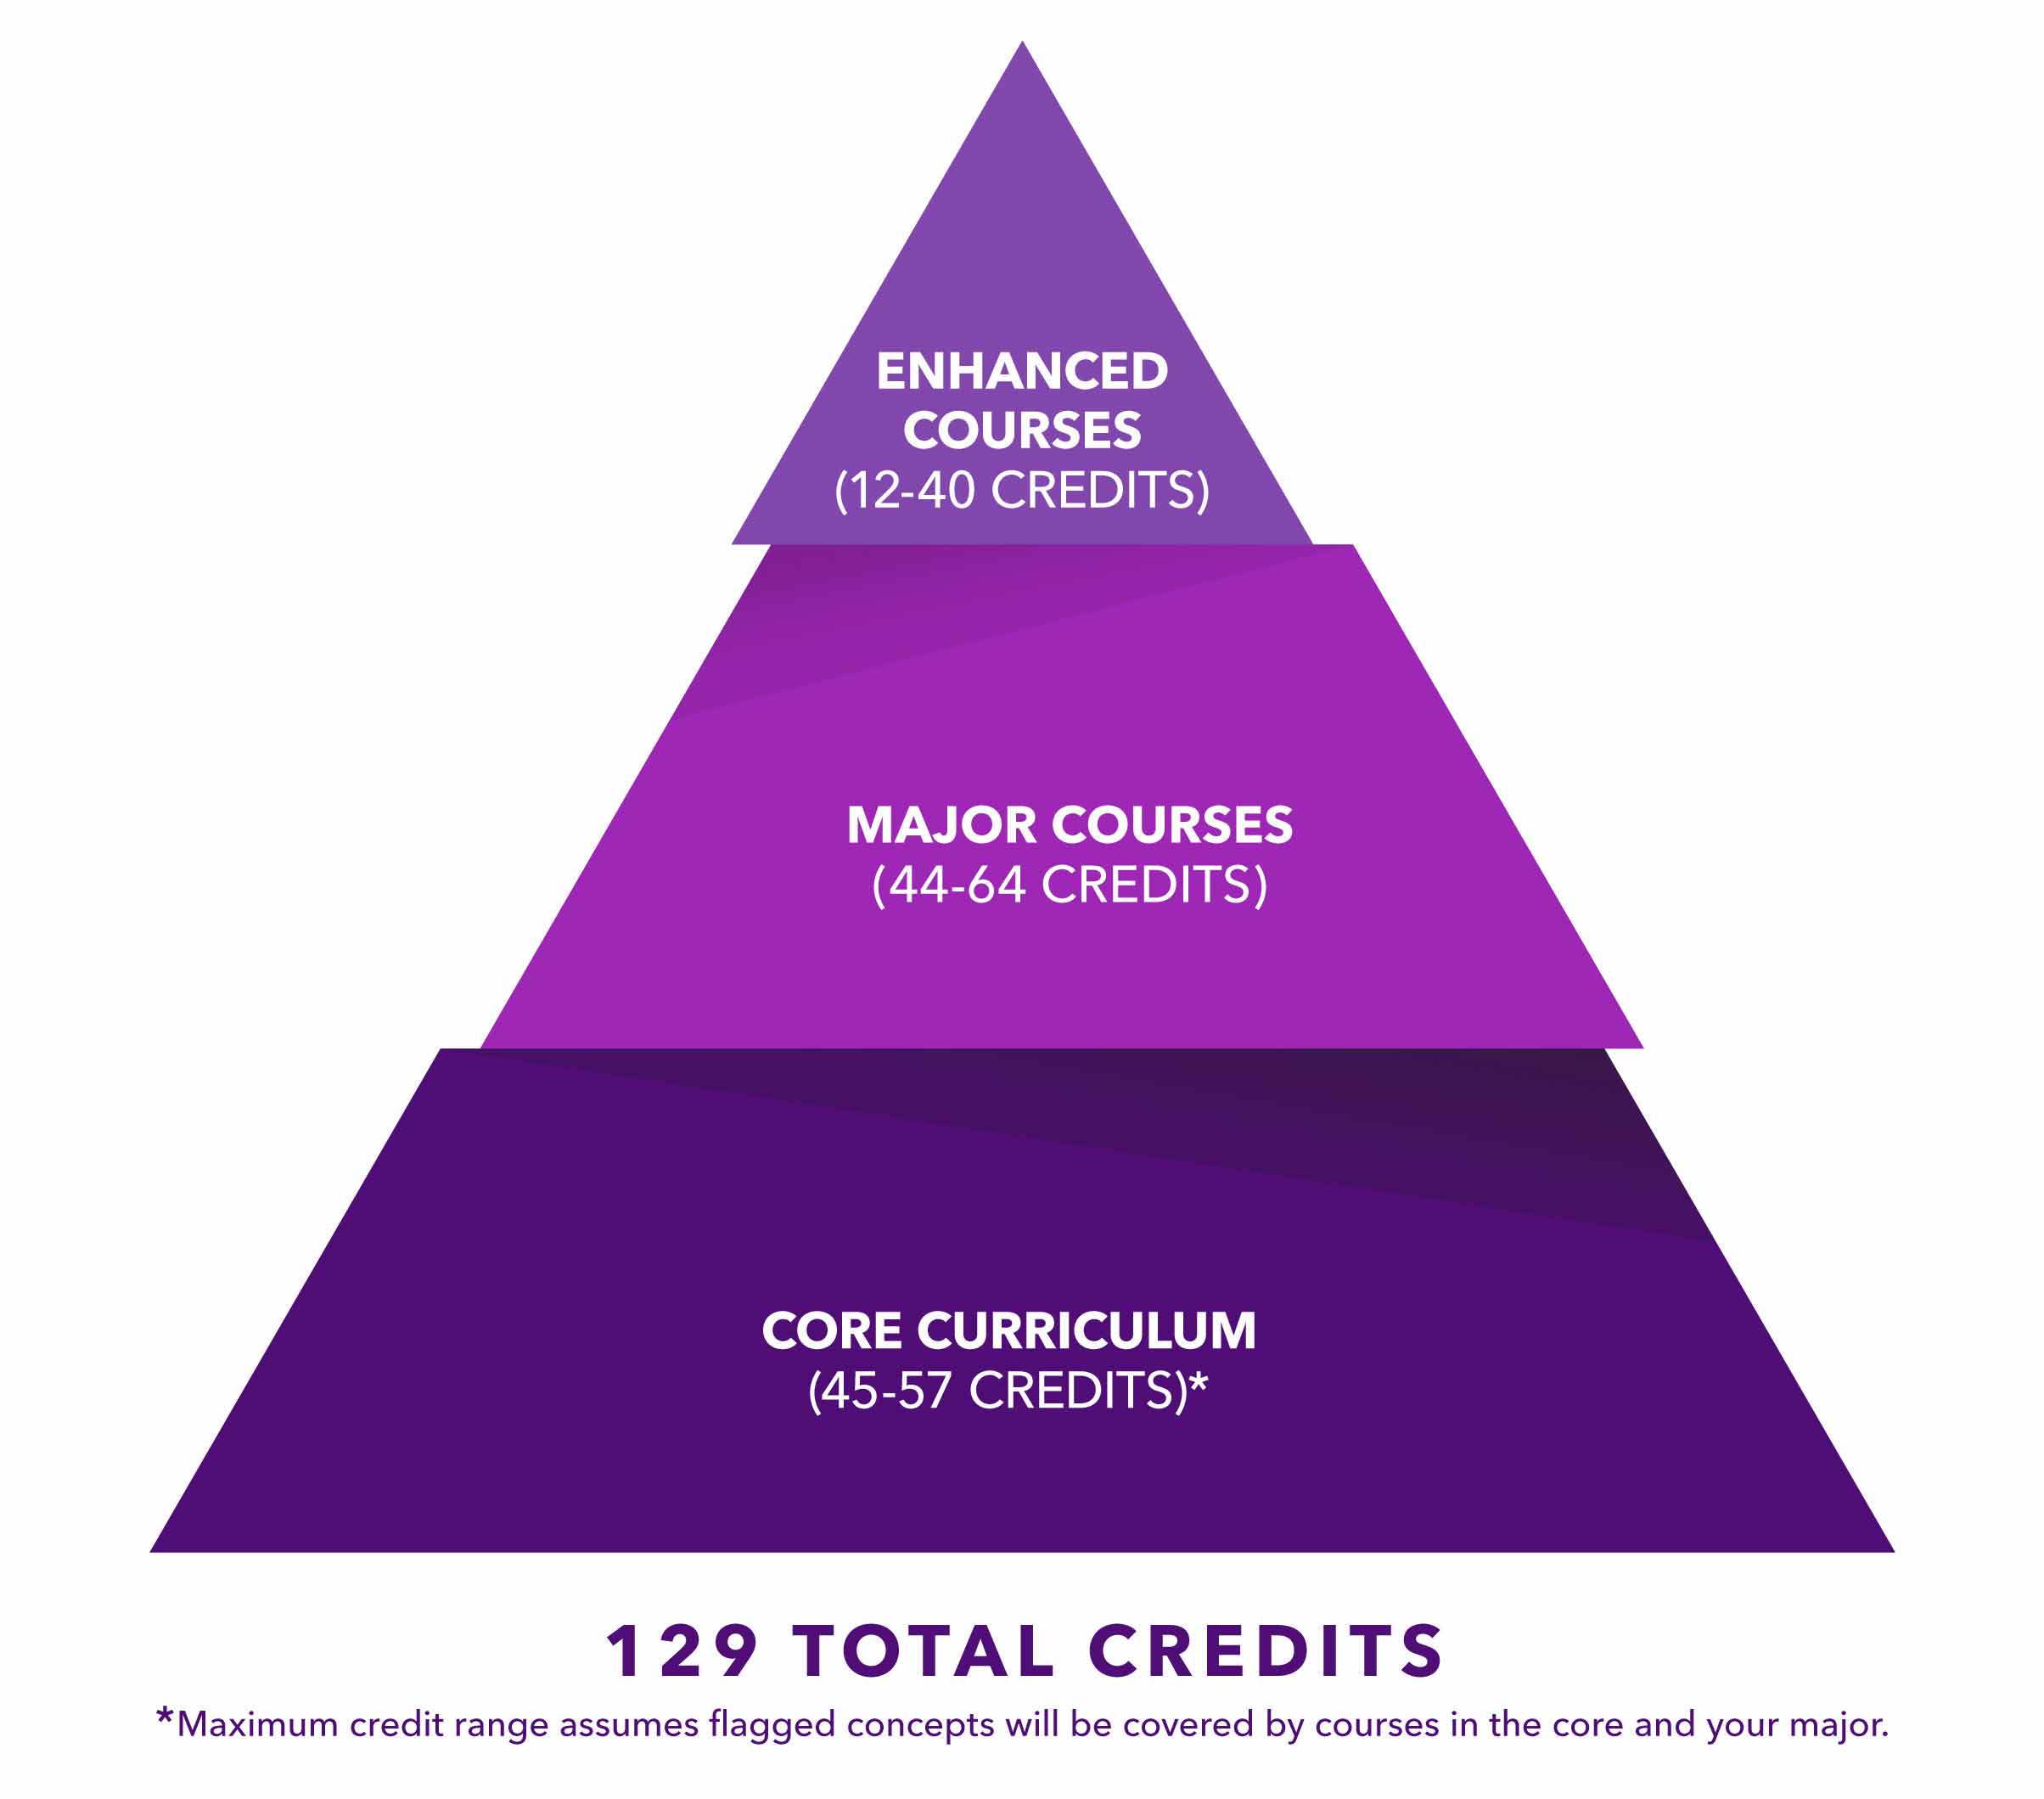 Pyramid infographic outlining credits needed for core curriculum, major courses and enhanced courses.